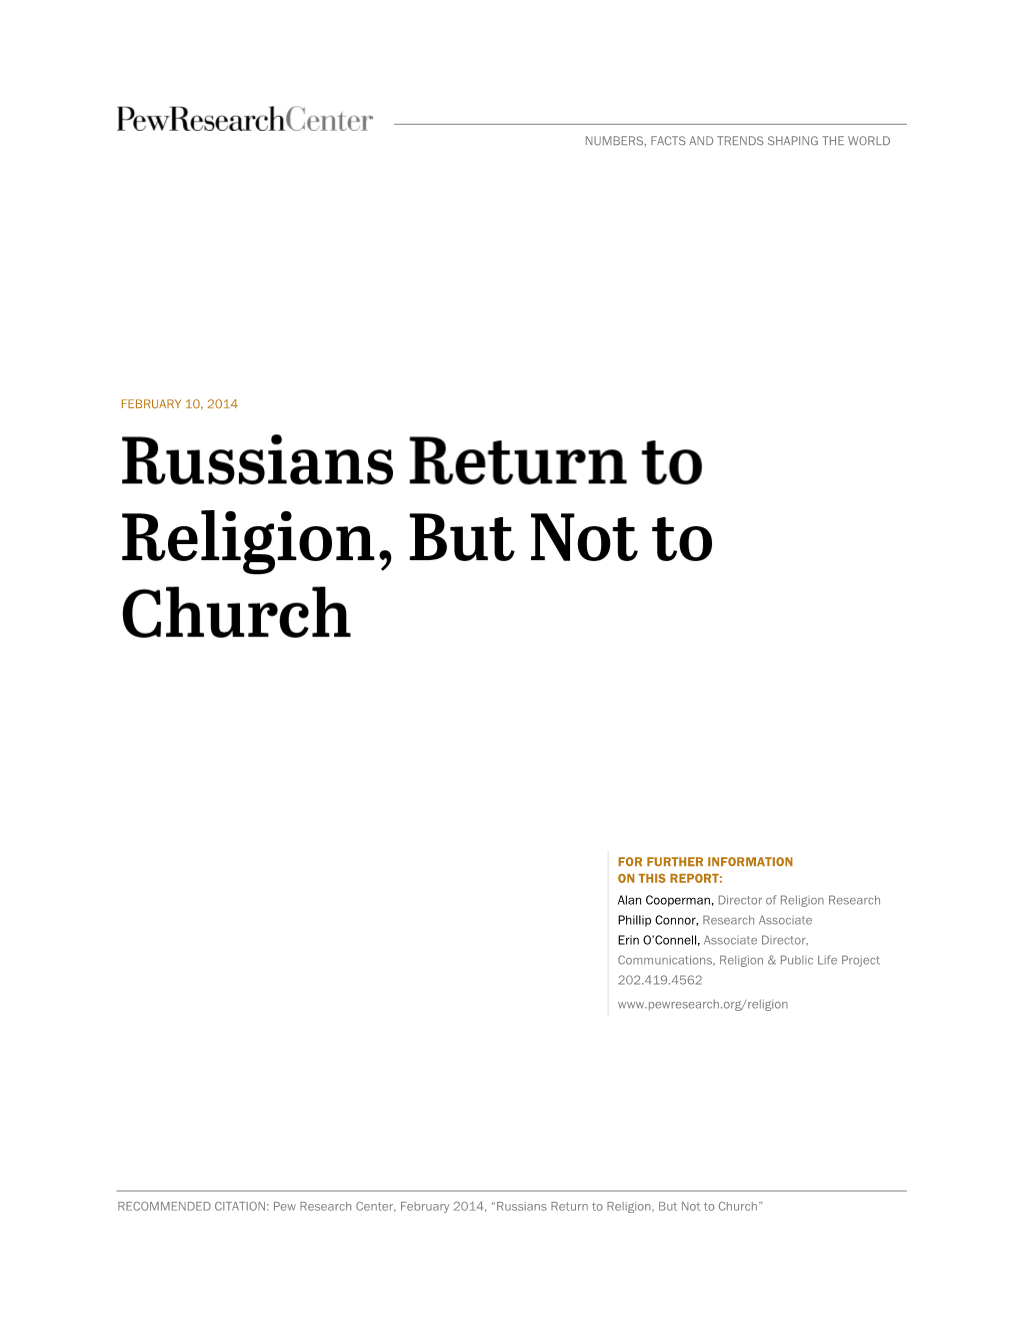 Russians Return to Religion, but Not to Church”